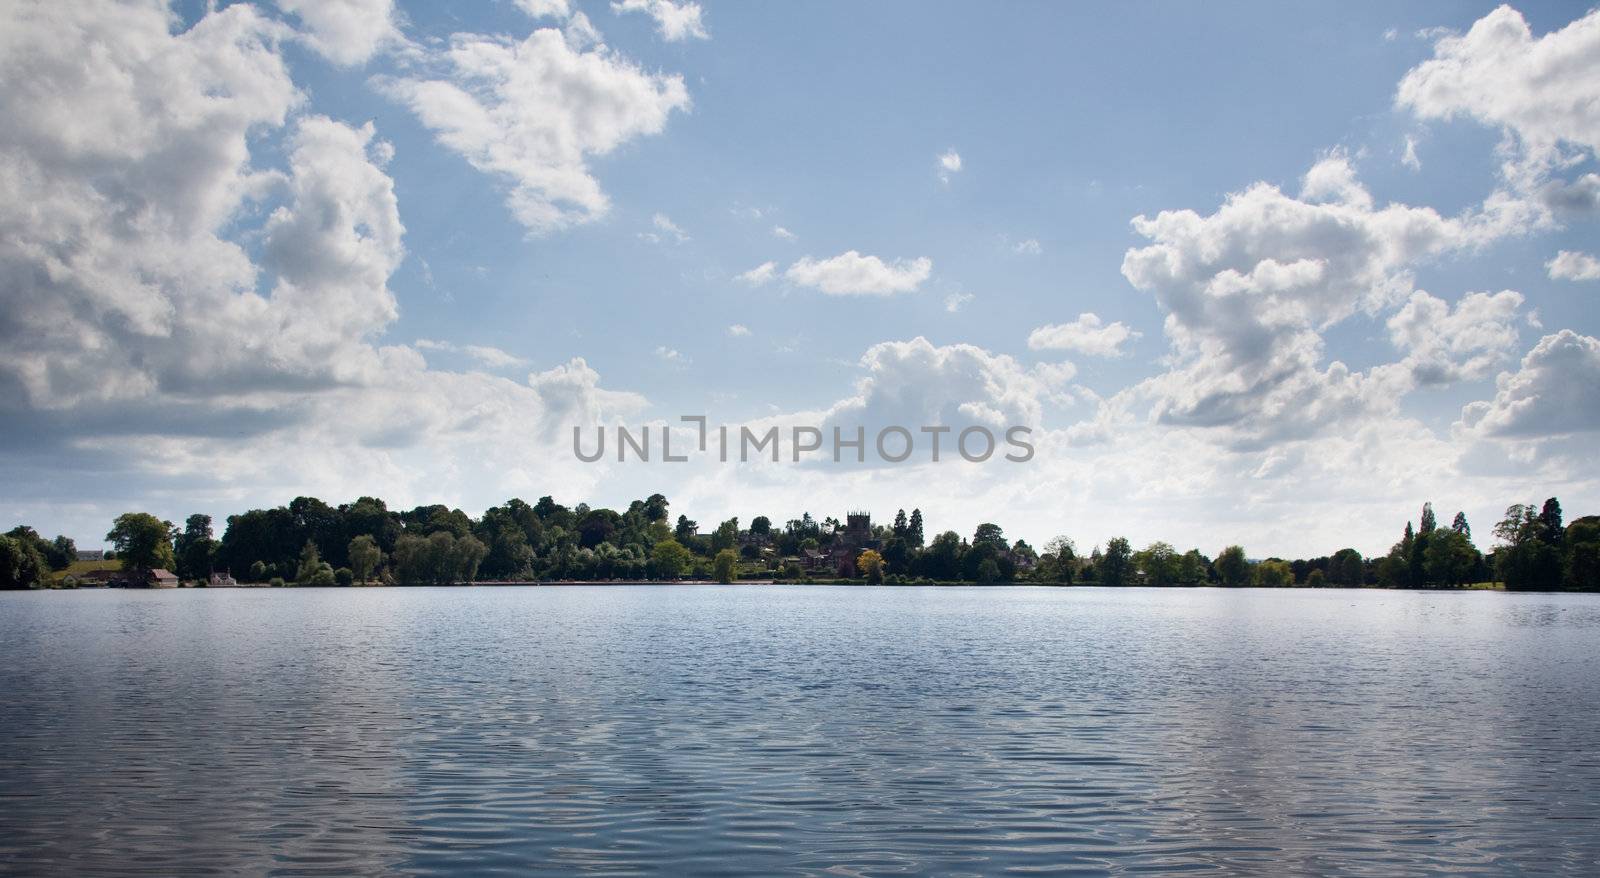 View of Ellesmere Lake in Shropshire with the town in the distance